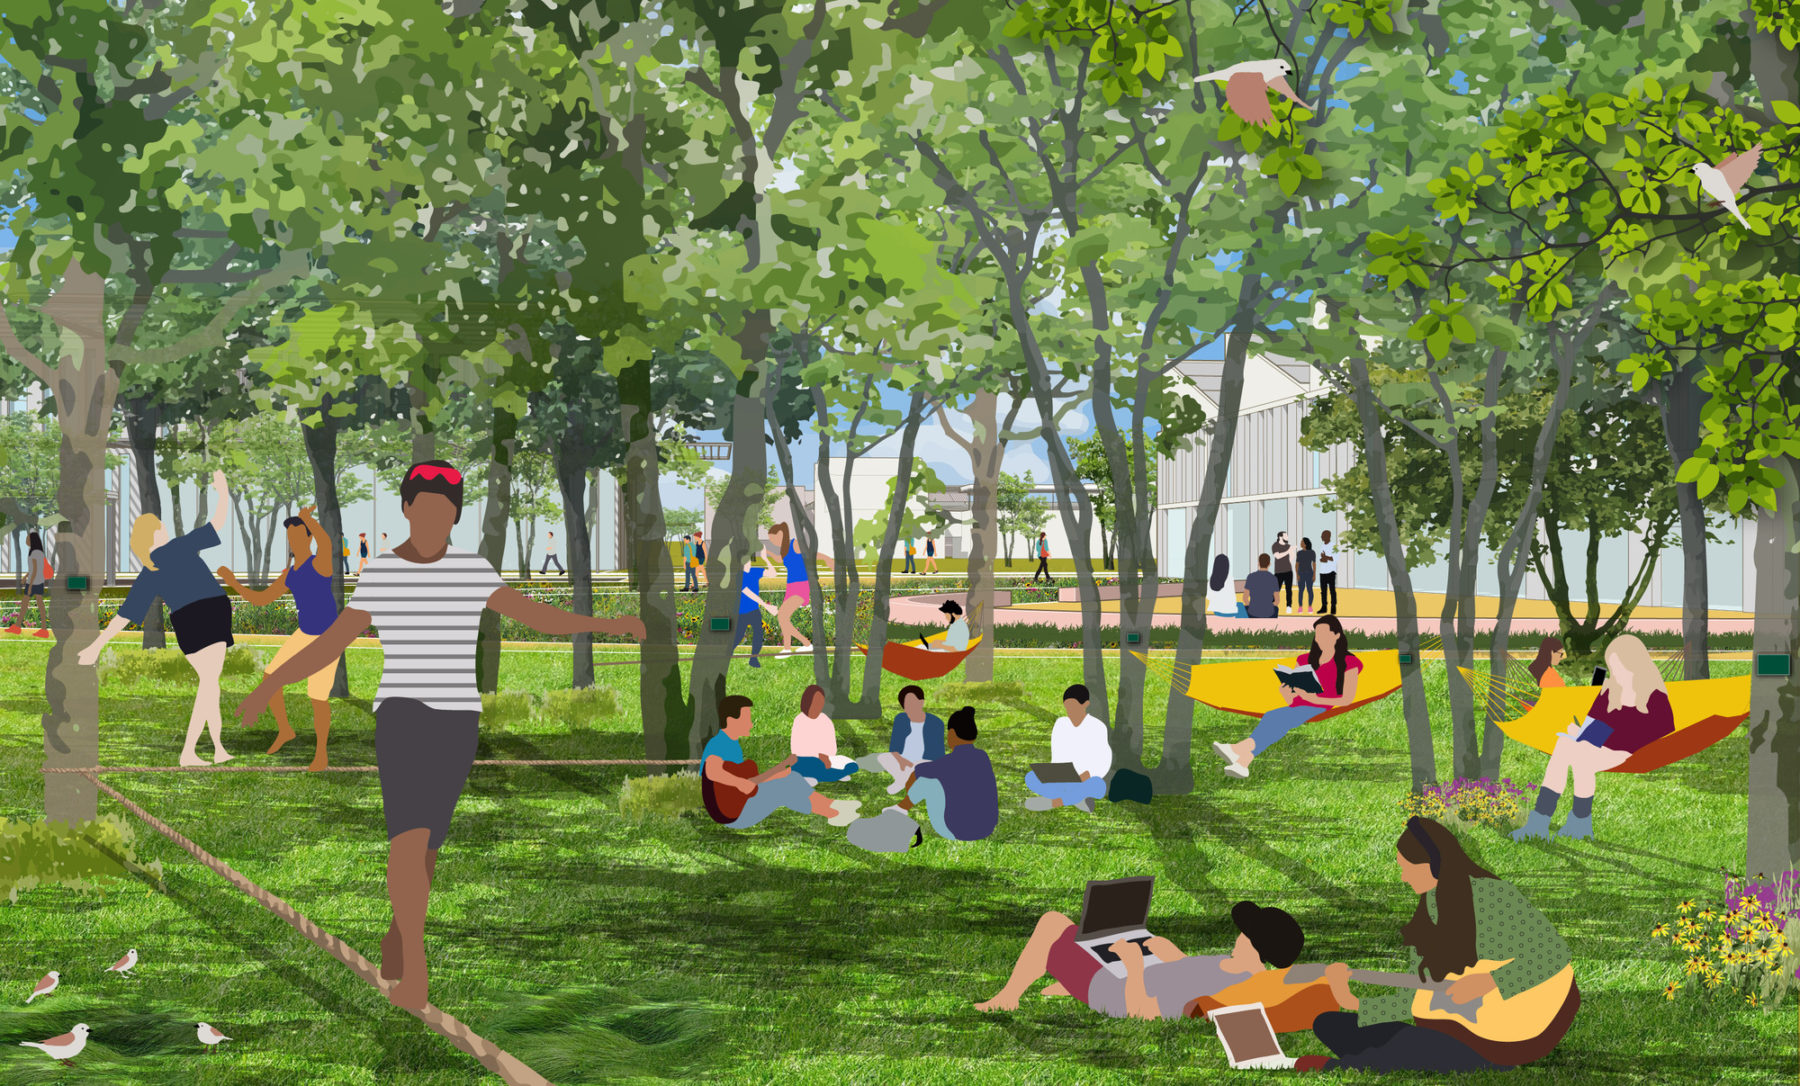 rendering of campus green. Students site amongst the trees in hammocks